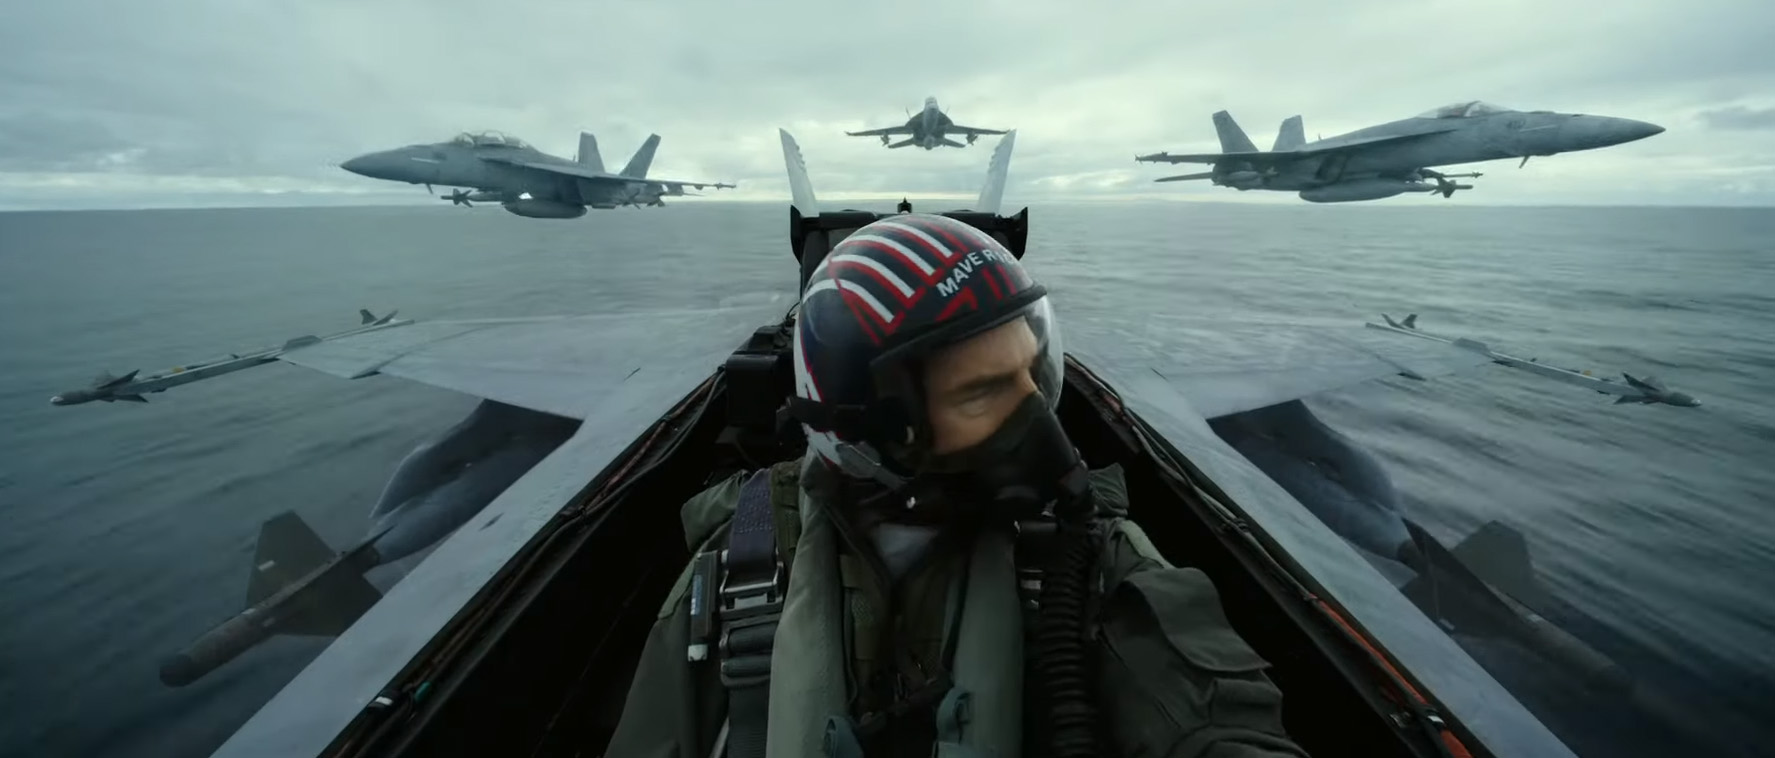 Top Gun: Maverick download the new version for android